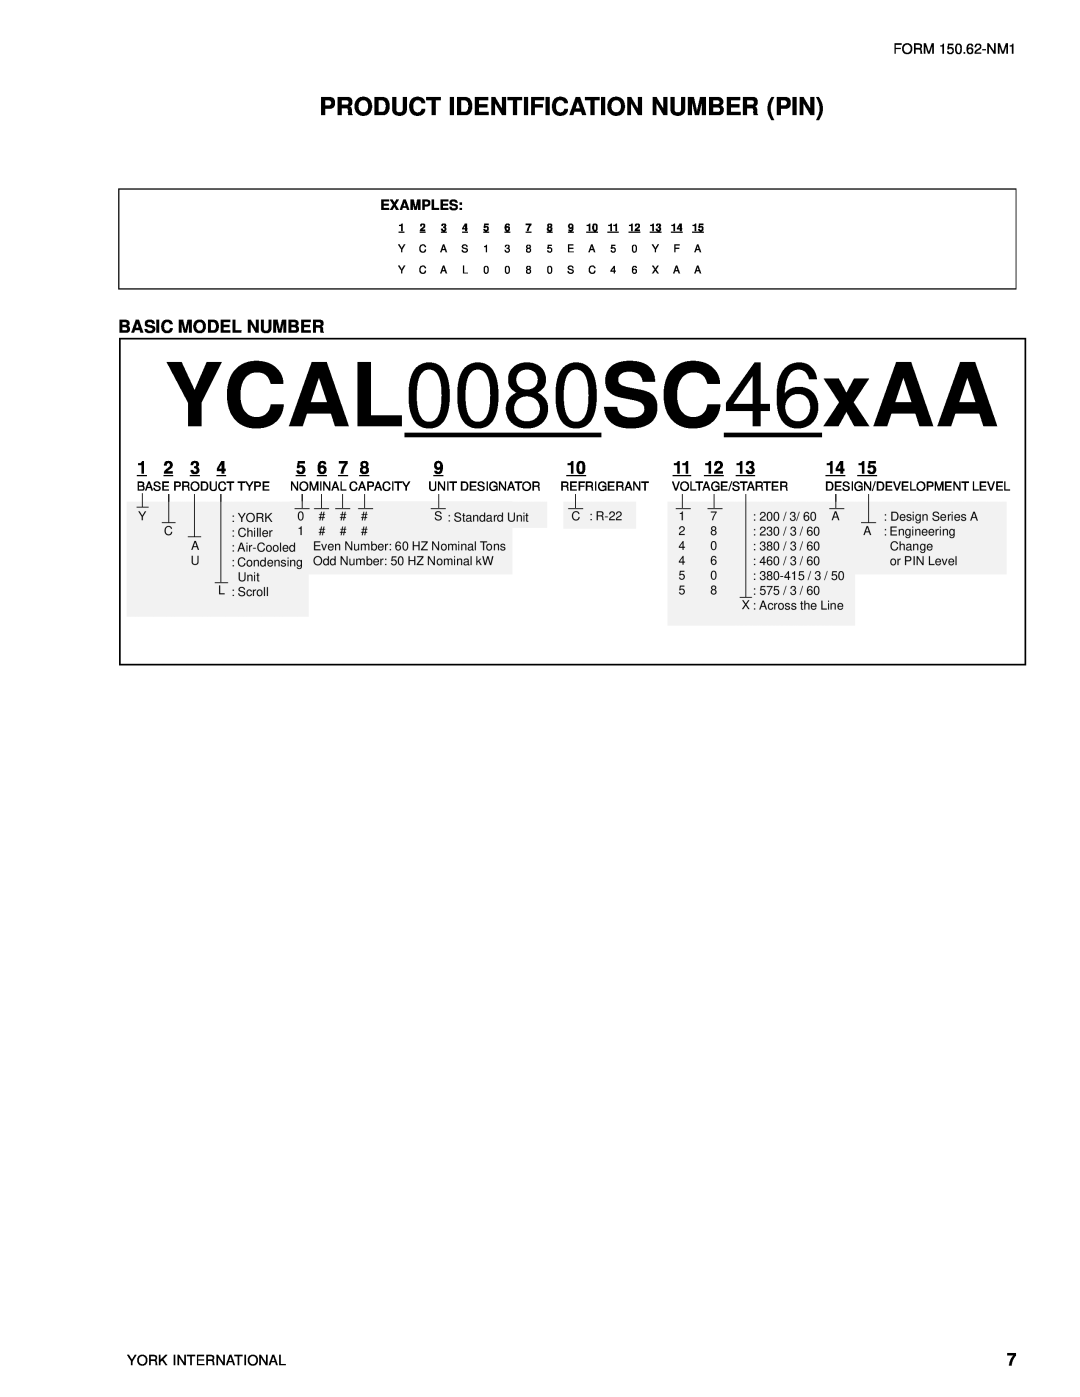 York YCAL0014SC manual Product Identification Number Pin, YCAL0080SC46xAA, Basic Model Number 